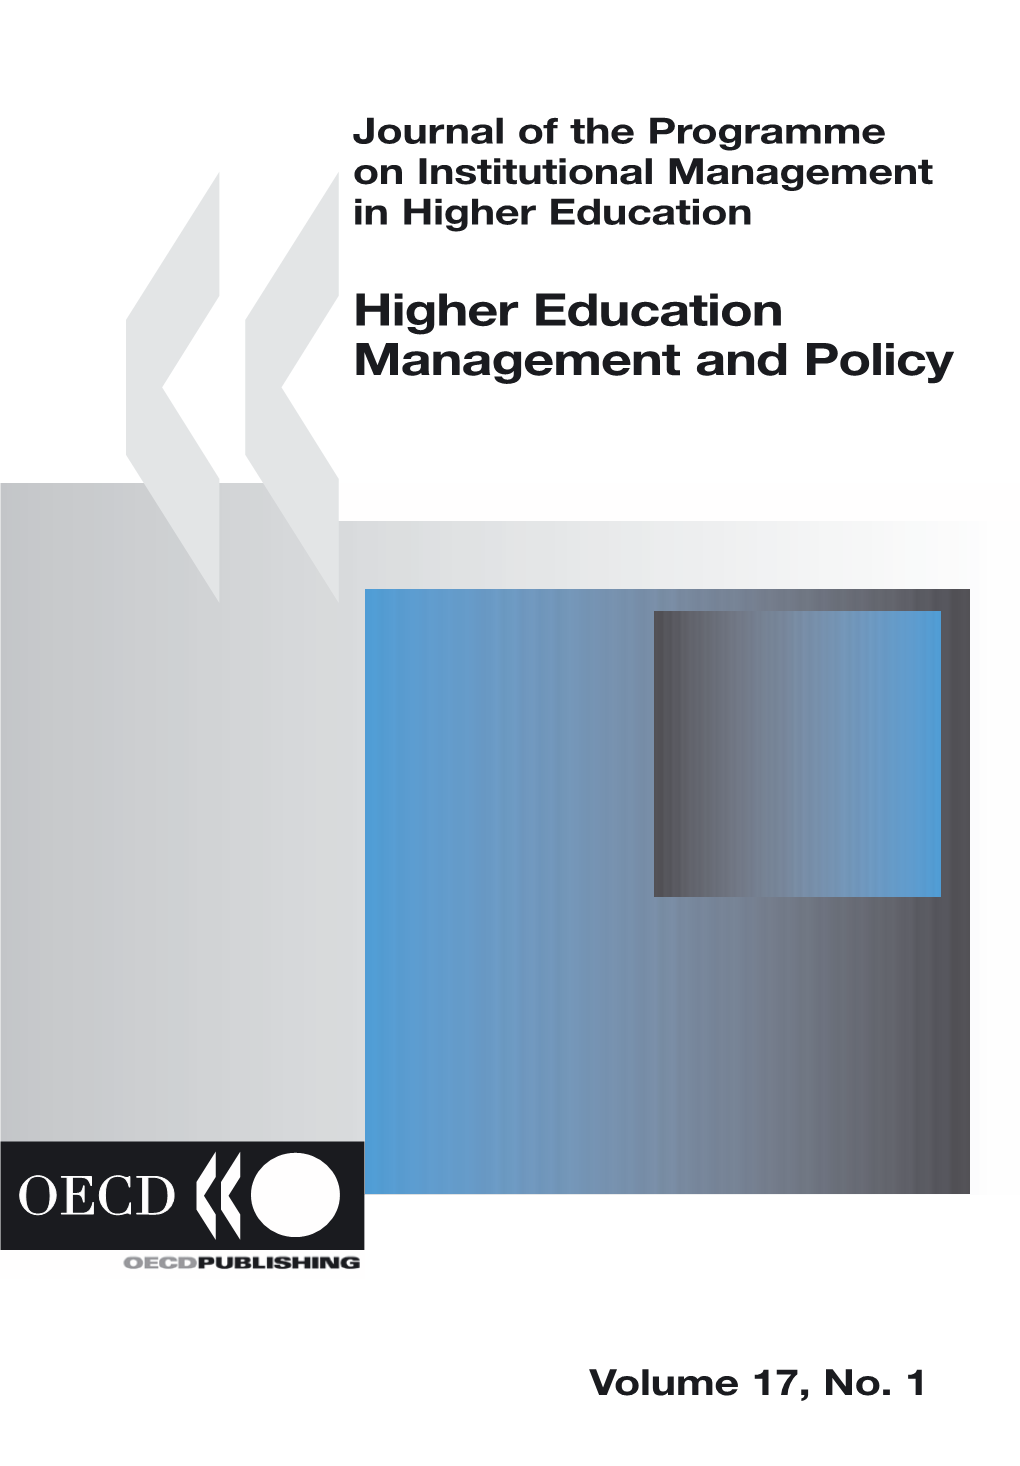 Higher Education Management and Policy 45 23 -:HRLGSC=XYZUUU: 89 2005 01 1 P (3 ISSUES)